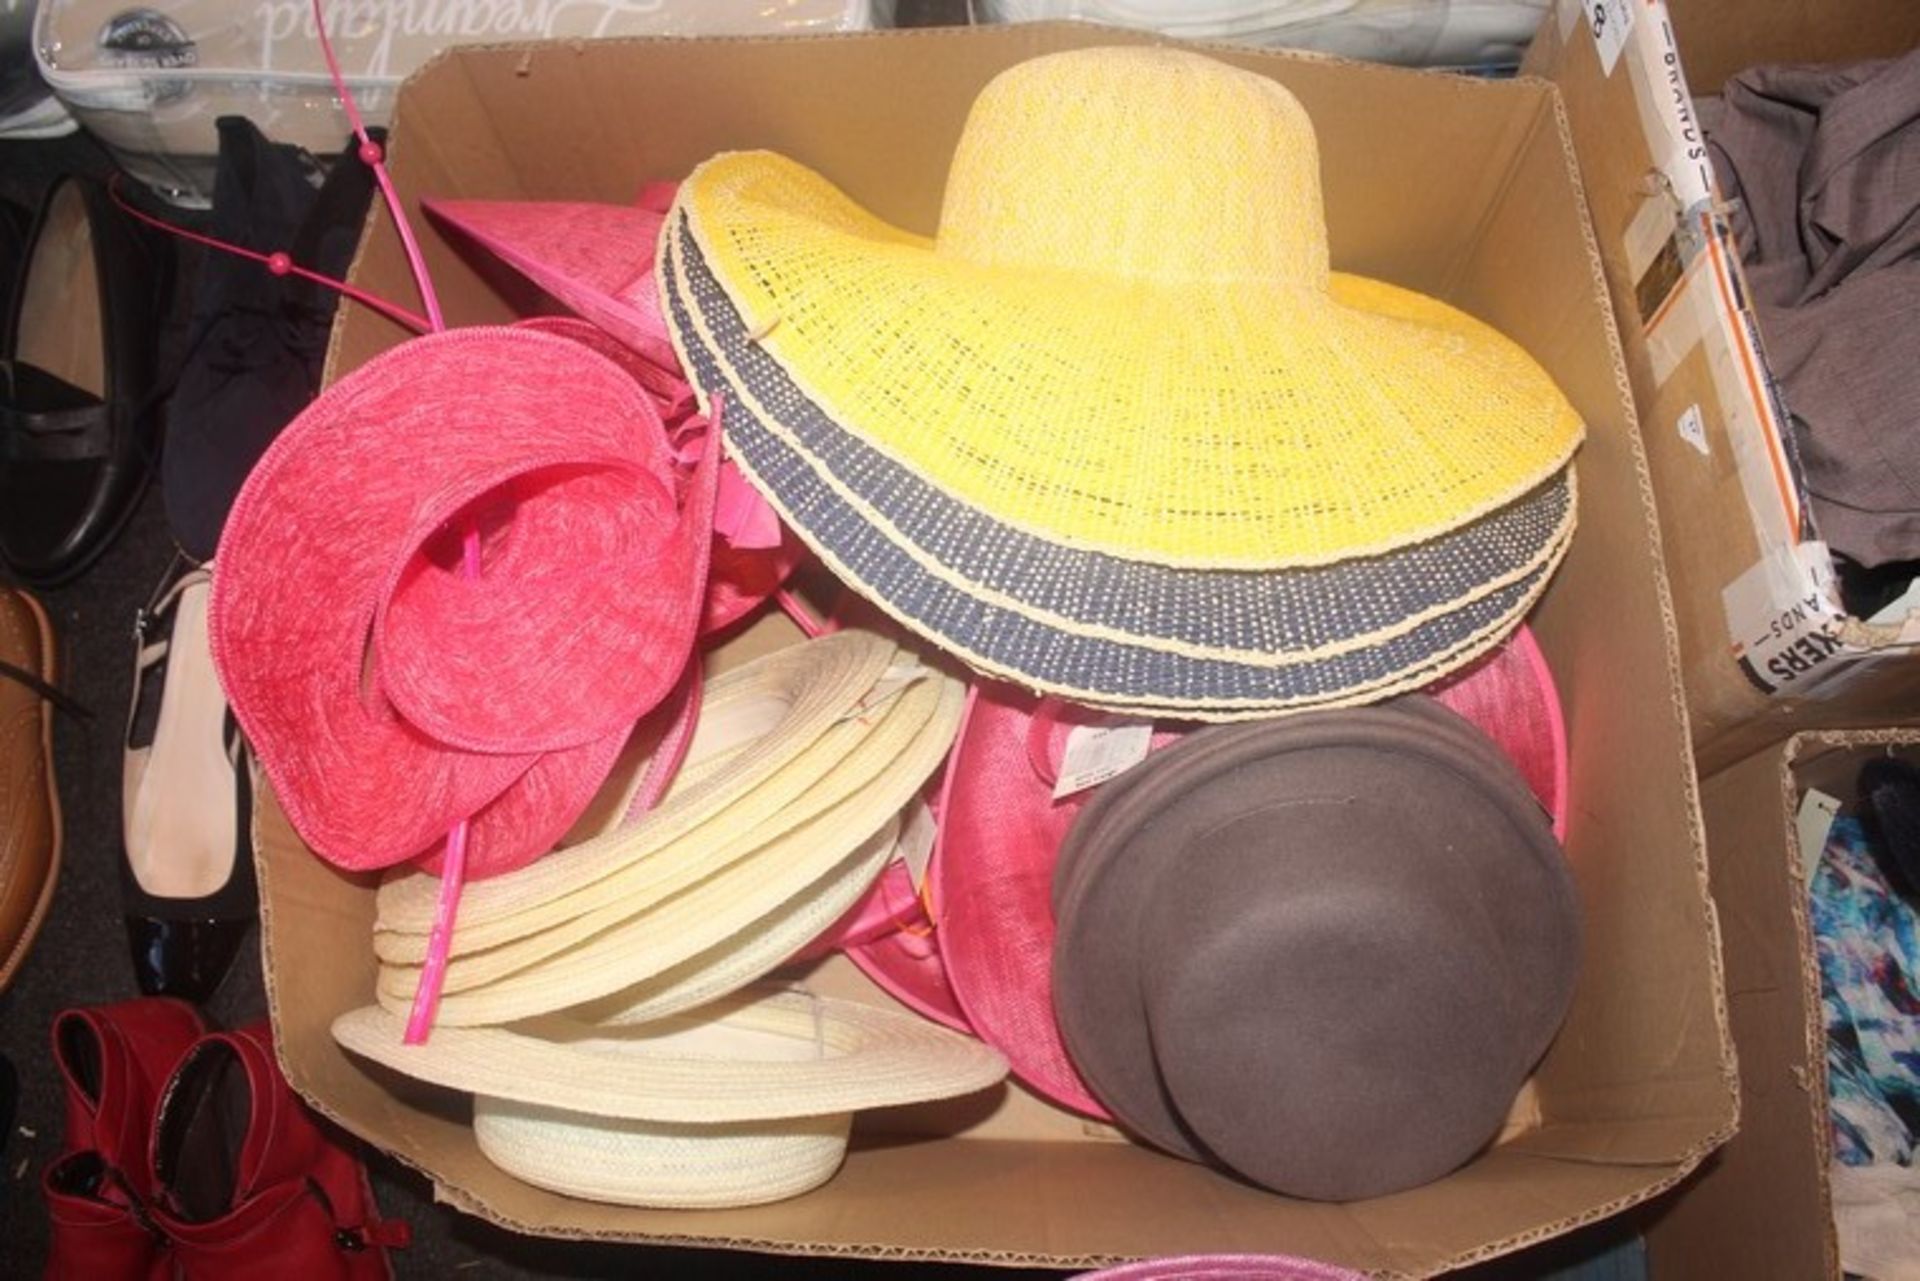 12 x ASSORTED DESIGNER HATS IN A BOX (28.09.17) (33.075) *PLEASE NOTE THAT THE BID PRICE IS